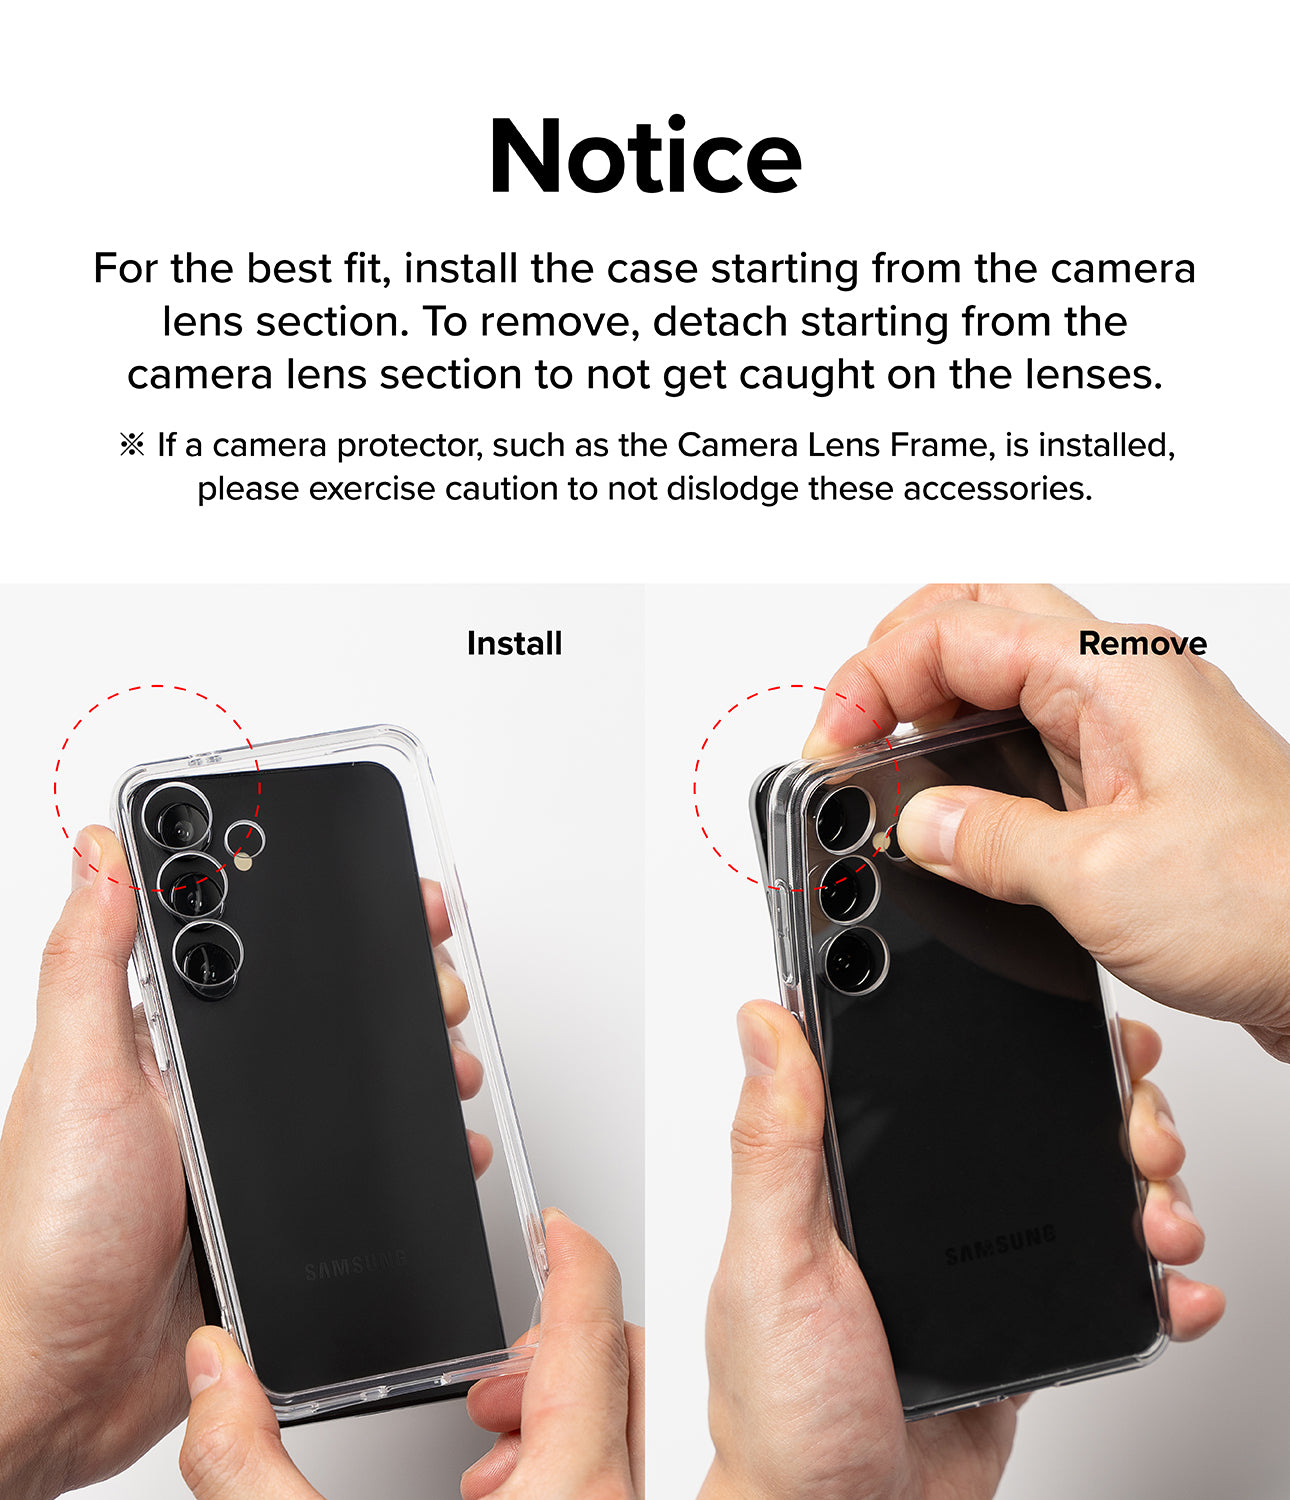 Galaxy S24 Ultra Case | Onyx - NavyGalaxy S24 Ultra Case | Onyx - Navy - Notice. For the best fit, install the case starting from the camera lens section. To remove, detach starting from the camera lens section to not get caught on the lenses.